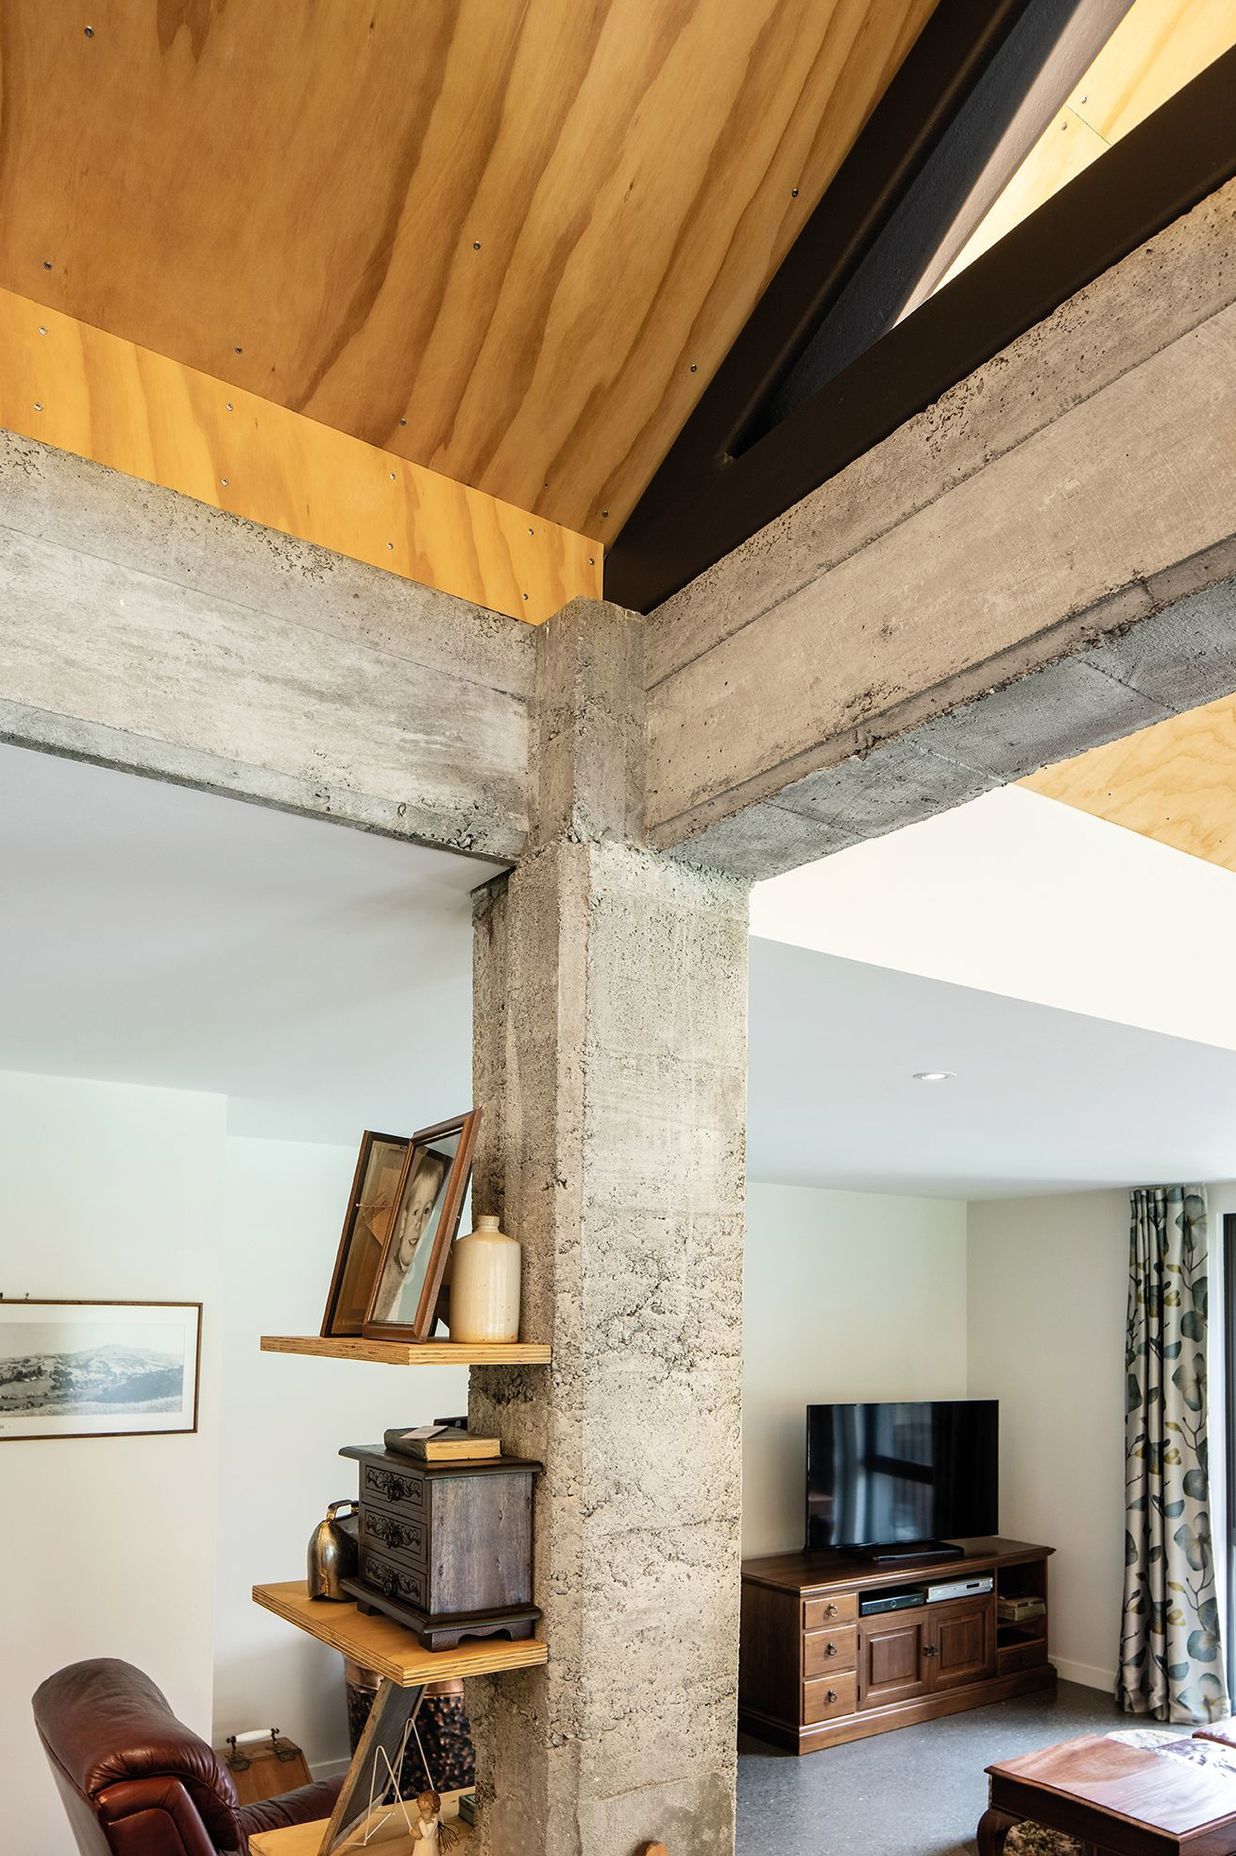 The owners wanted to embrace the historic context of the building, so the concrete frame of the shed has been exposed on the interior of the new home.